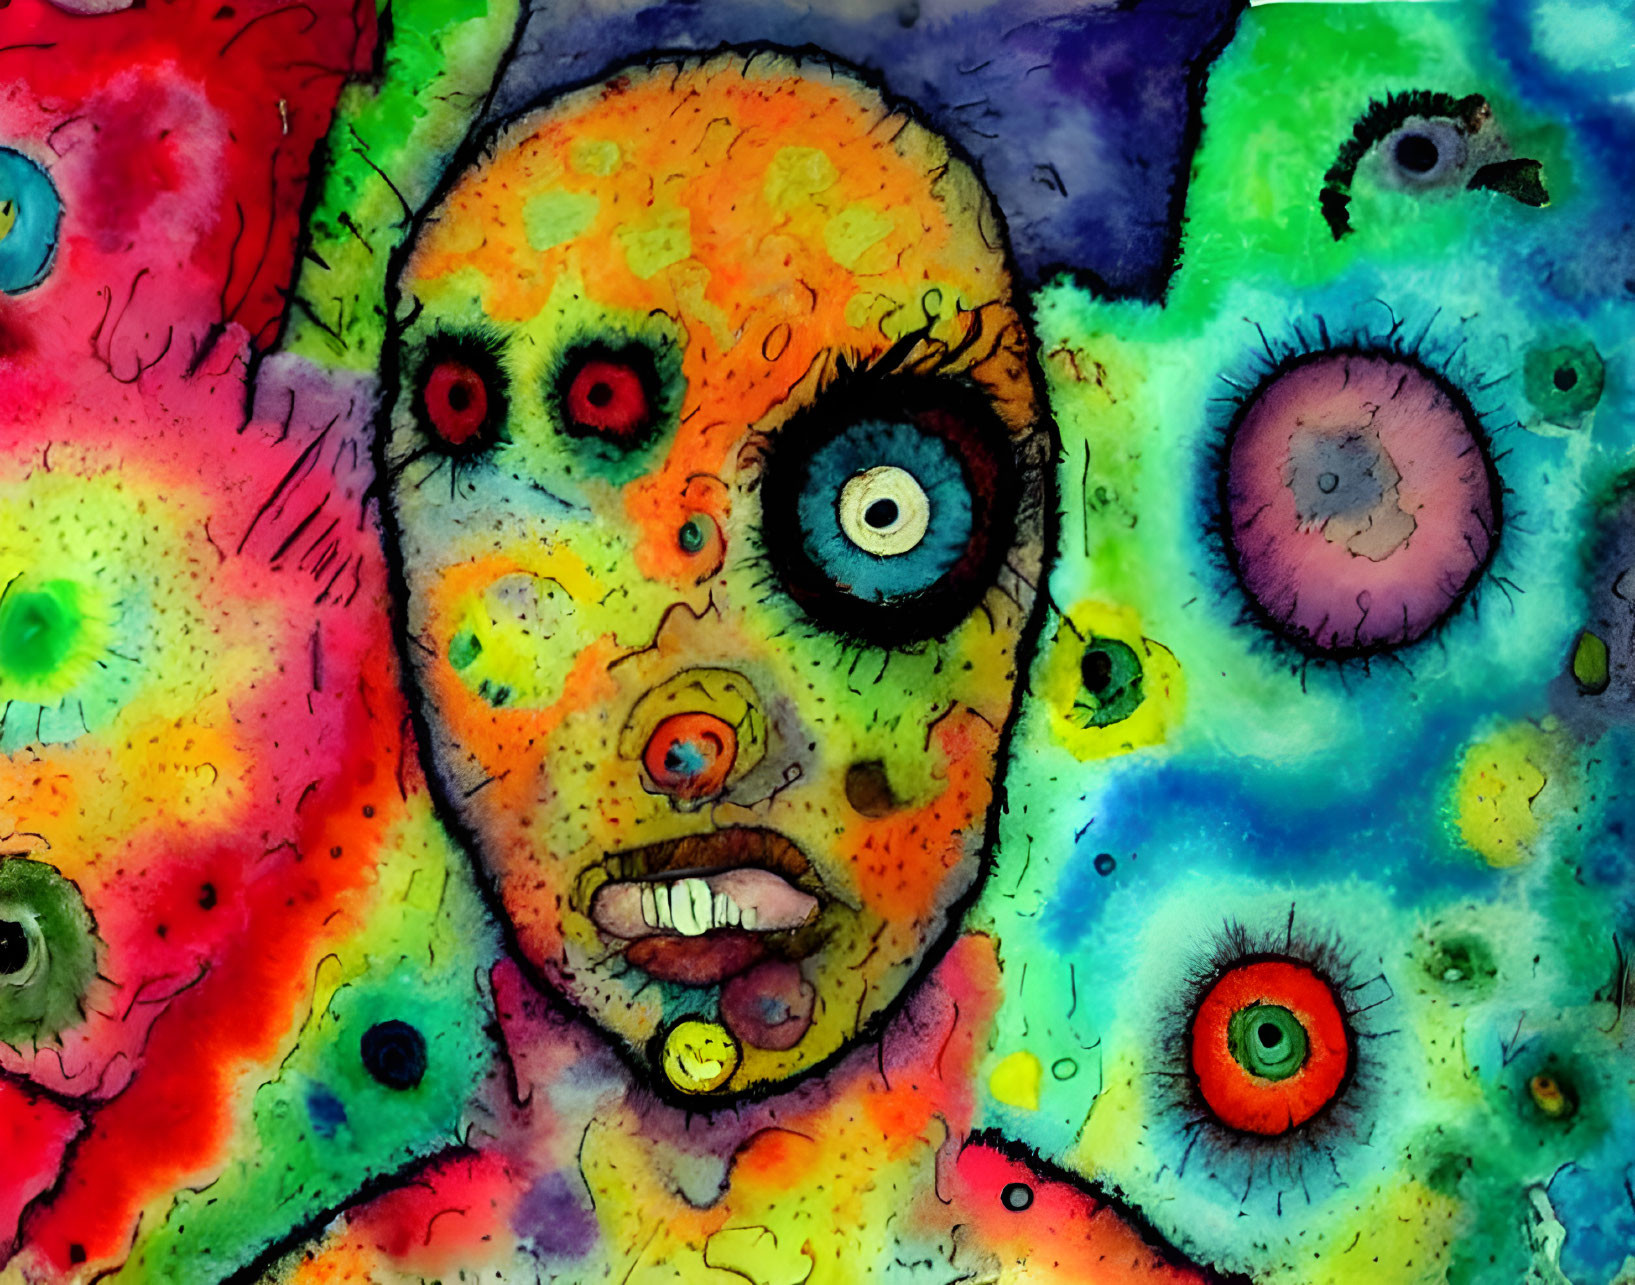 Colorful Watercolor Painting of Face with Mismatched Eyes